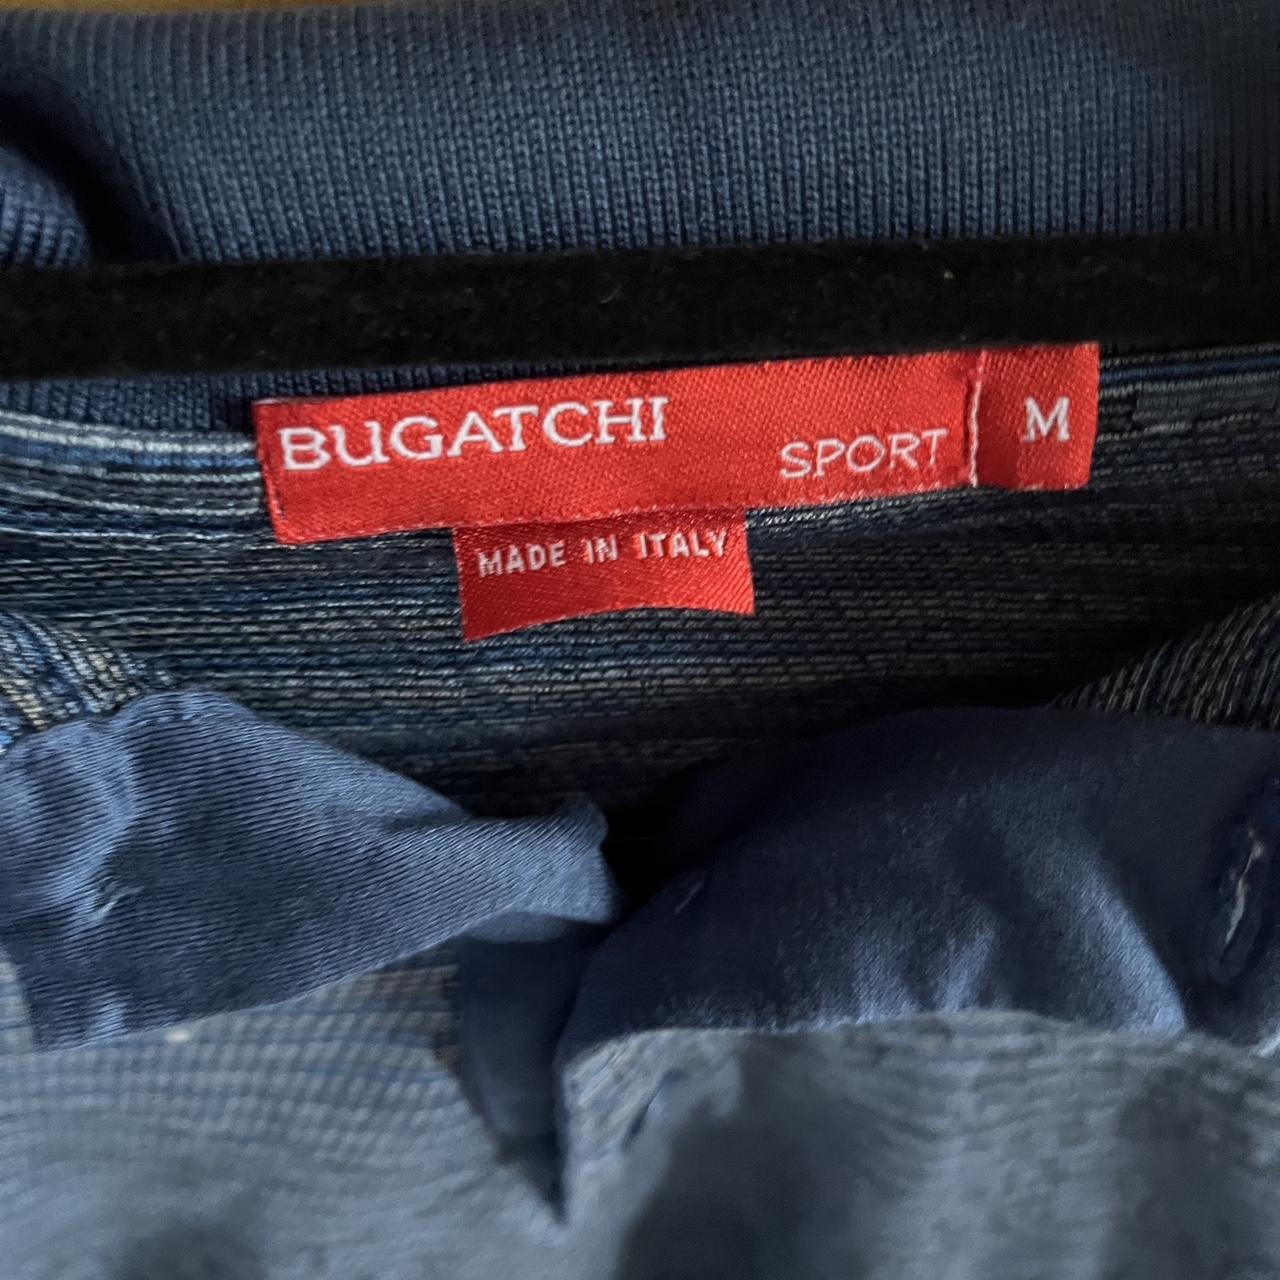 Bugatchi polo shirt! So cute and has a unique pattern! - Depop